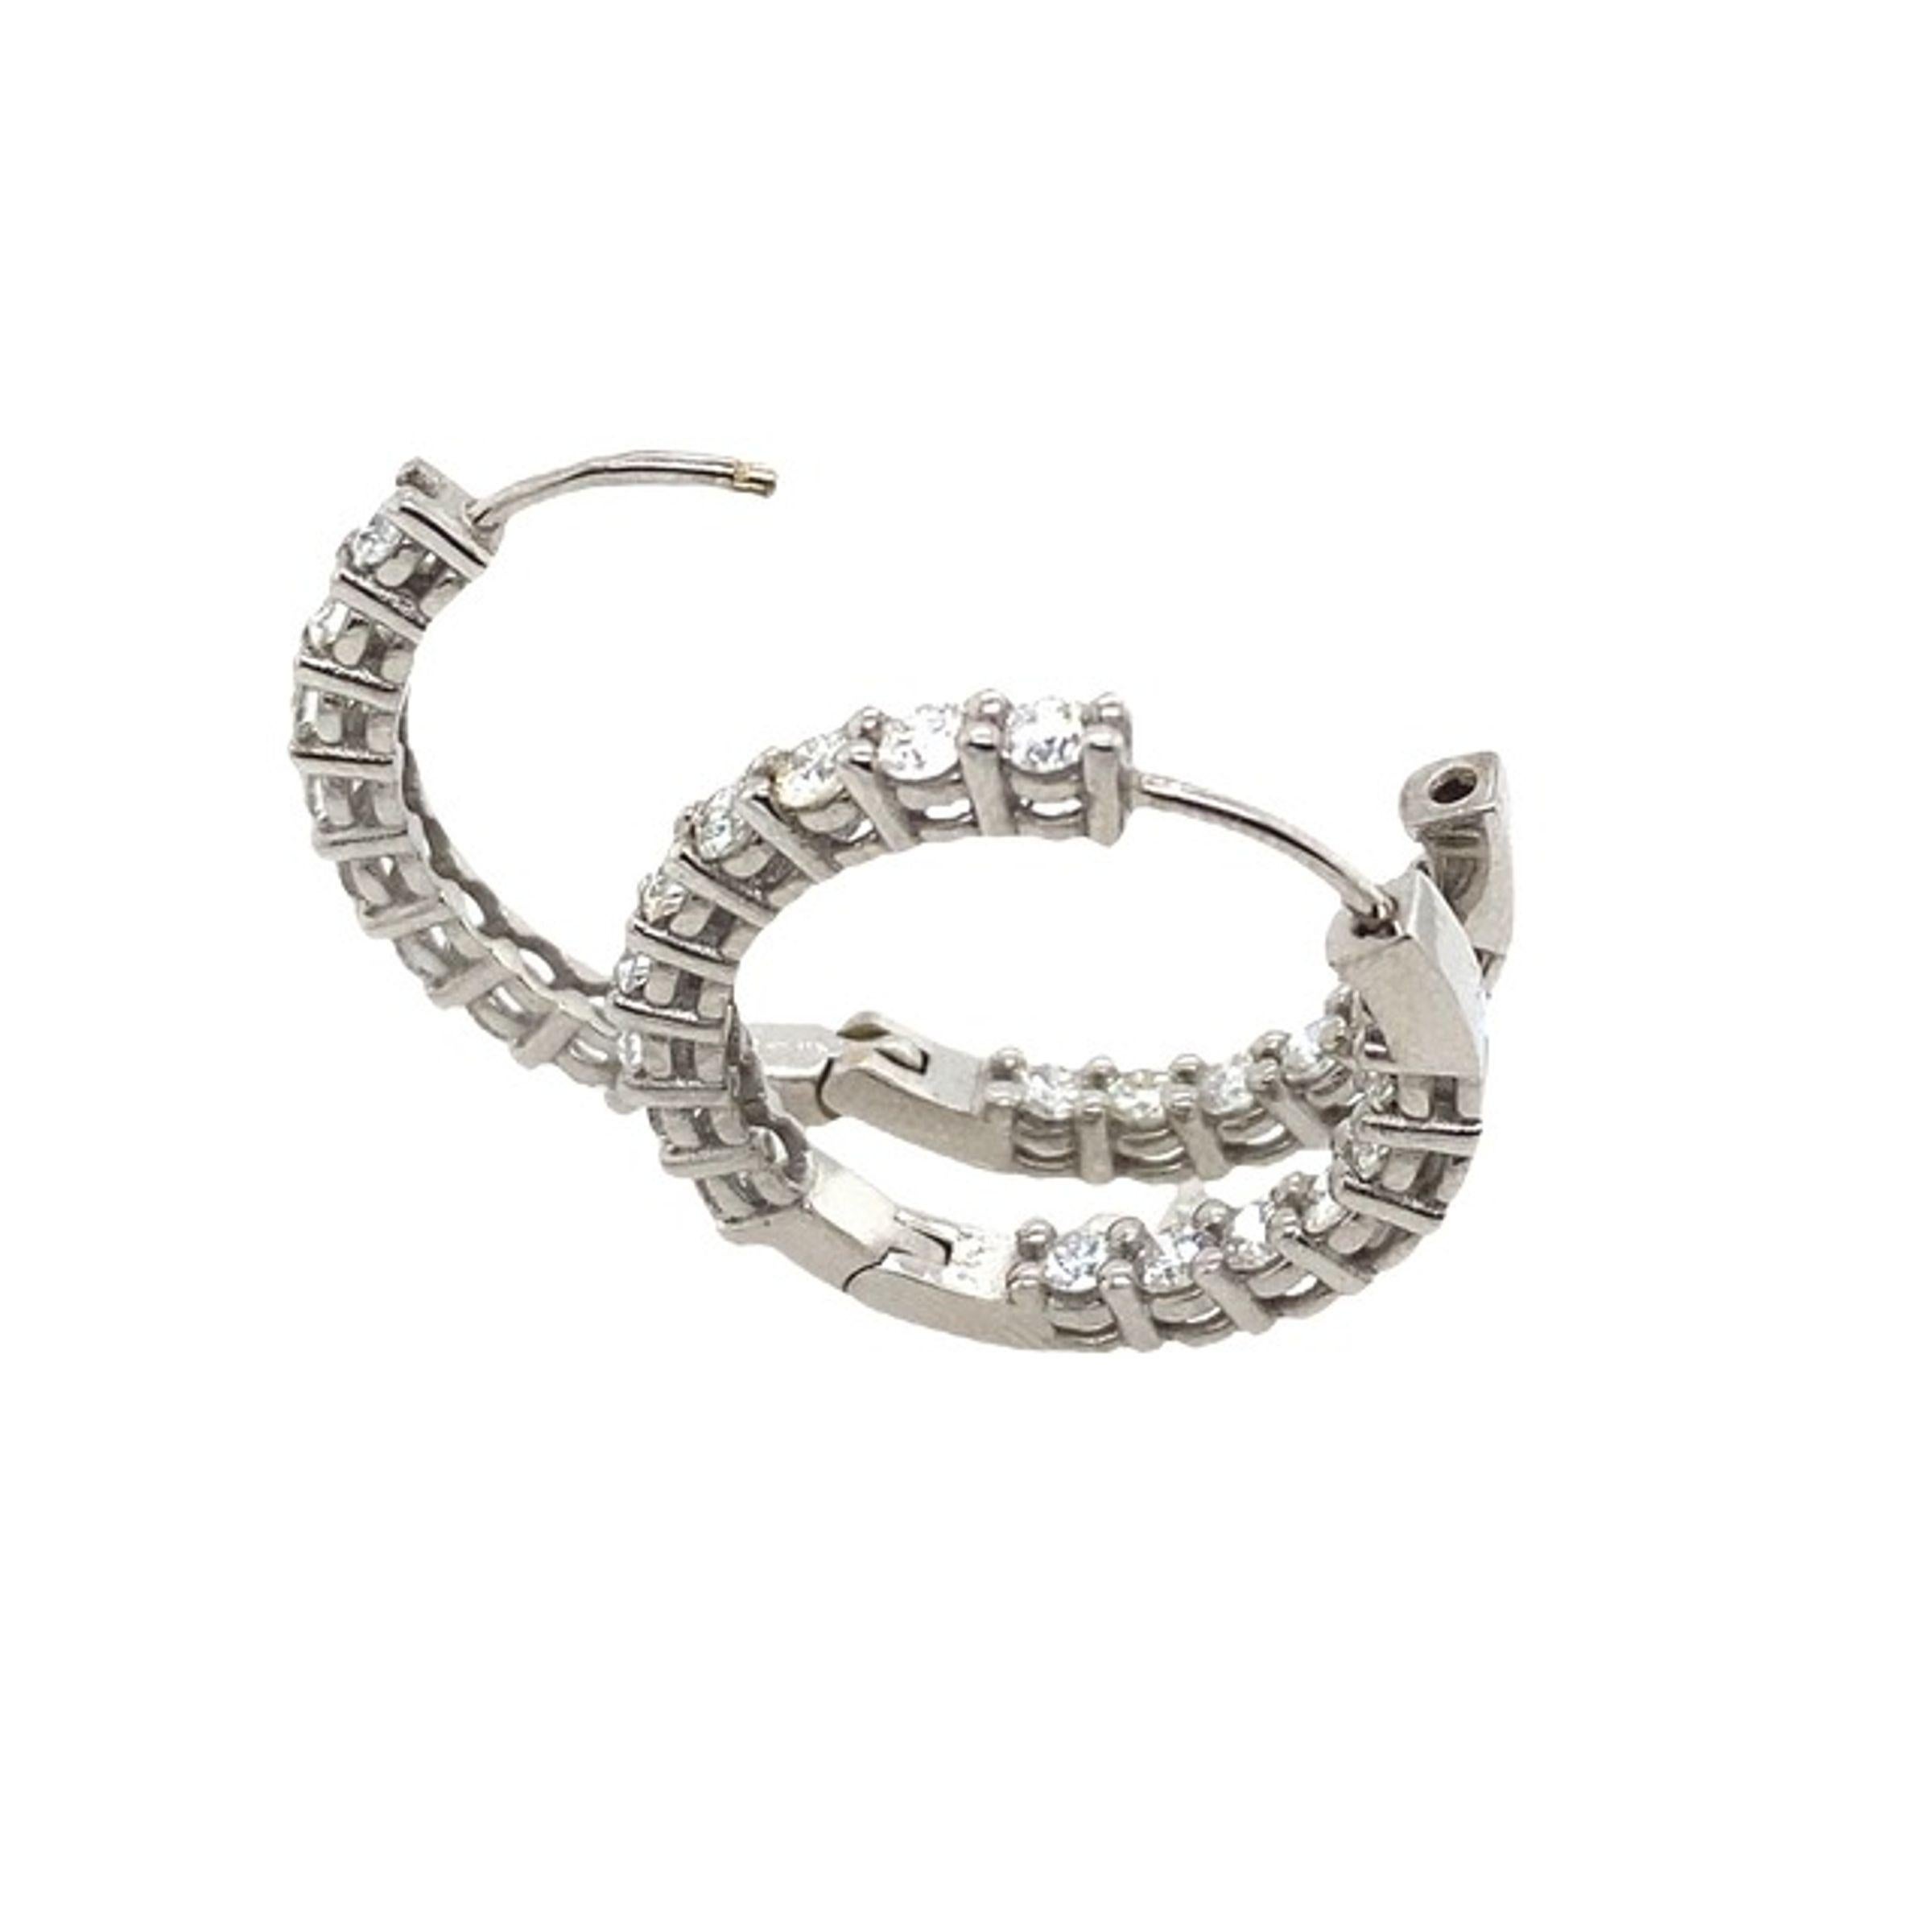 This pair of hinged hoop earrings was designed to be the perfect everyday earring.
It features a total of 1.80ct Diamonds mounted on a 14ct White Gold hoop.
It is hinged, allowing it to swing from the ear.

Additional Information: 
Total Weight: